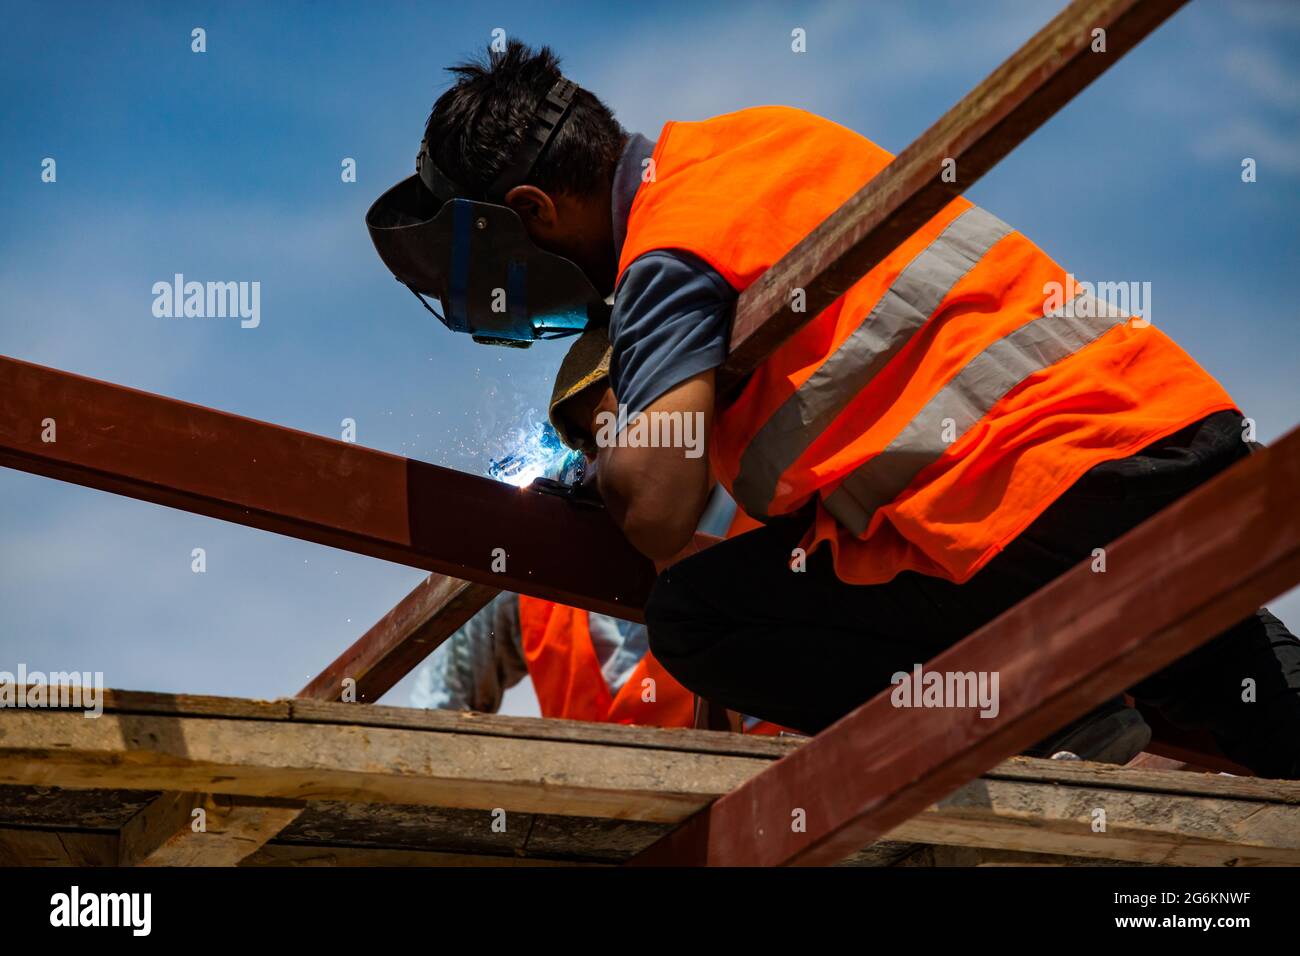 Close up photo of welder in welding mask and orange safety vest. No face. Flame in focus. Other part of photo blurred. Blue sky. Stock Photo